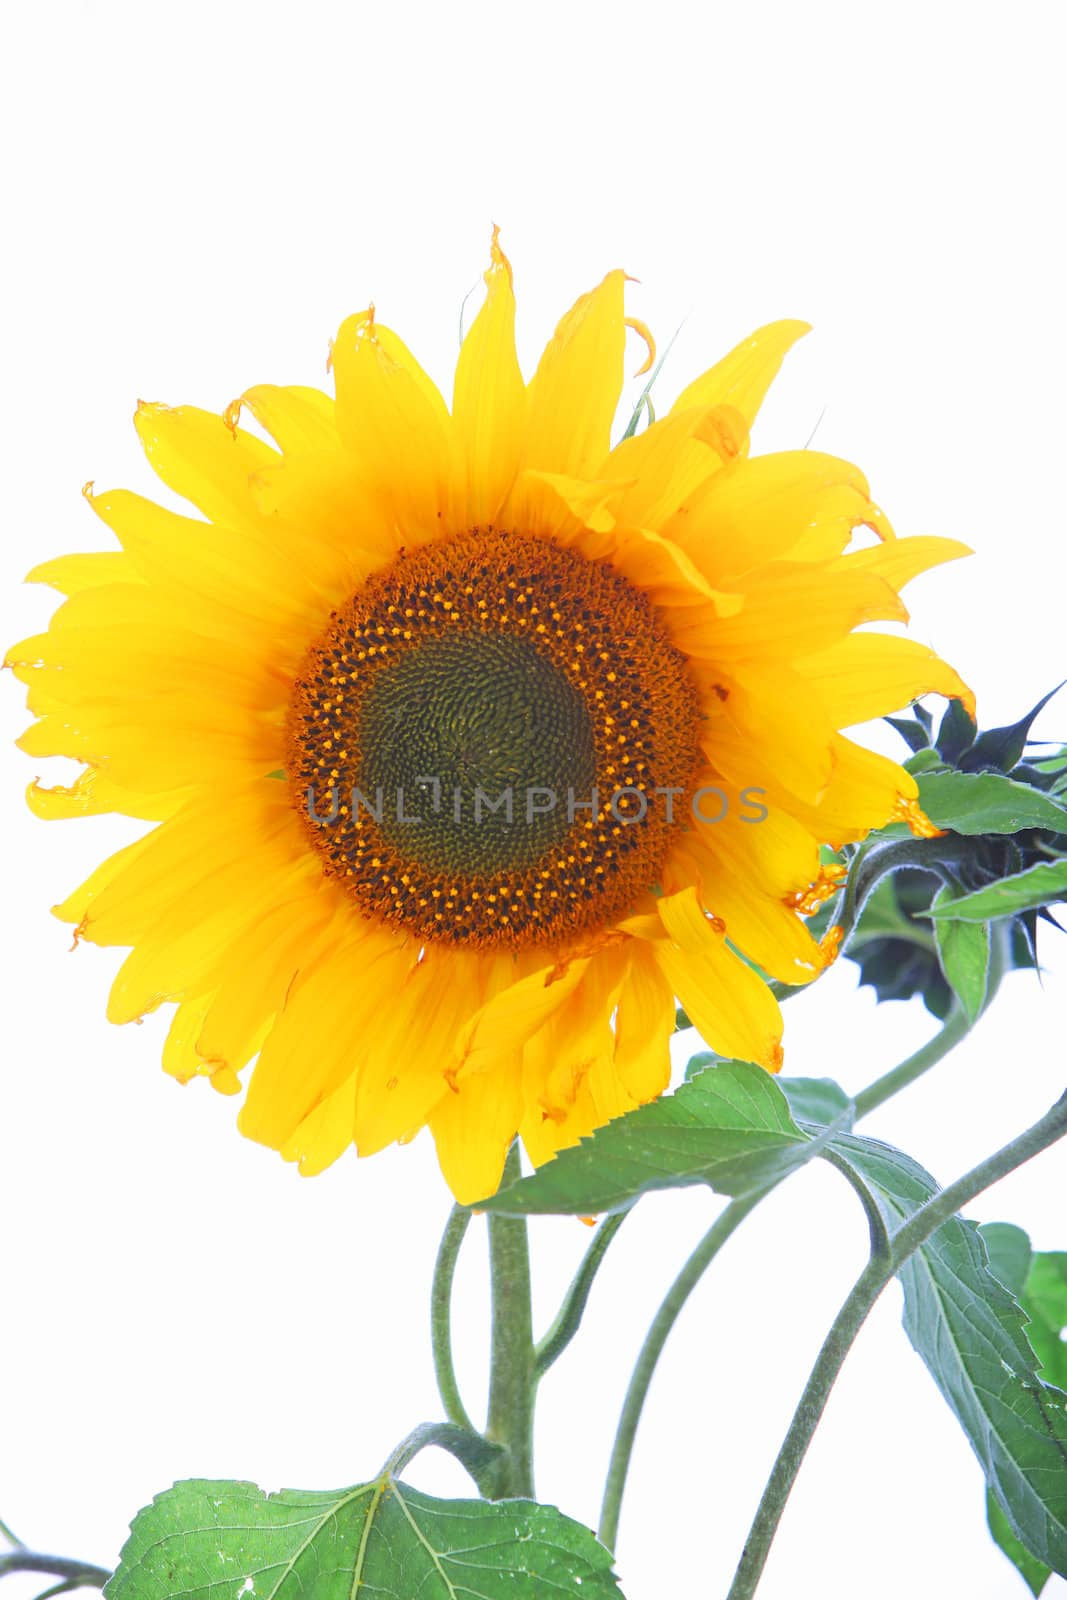 Single bright yellow sunflower showing the spiral arrangement of the disc florets with leaves isolated on a white background Single bright yellow sunflower with leaves isolated on a white background 